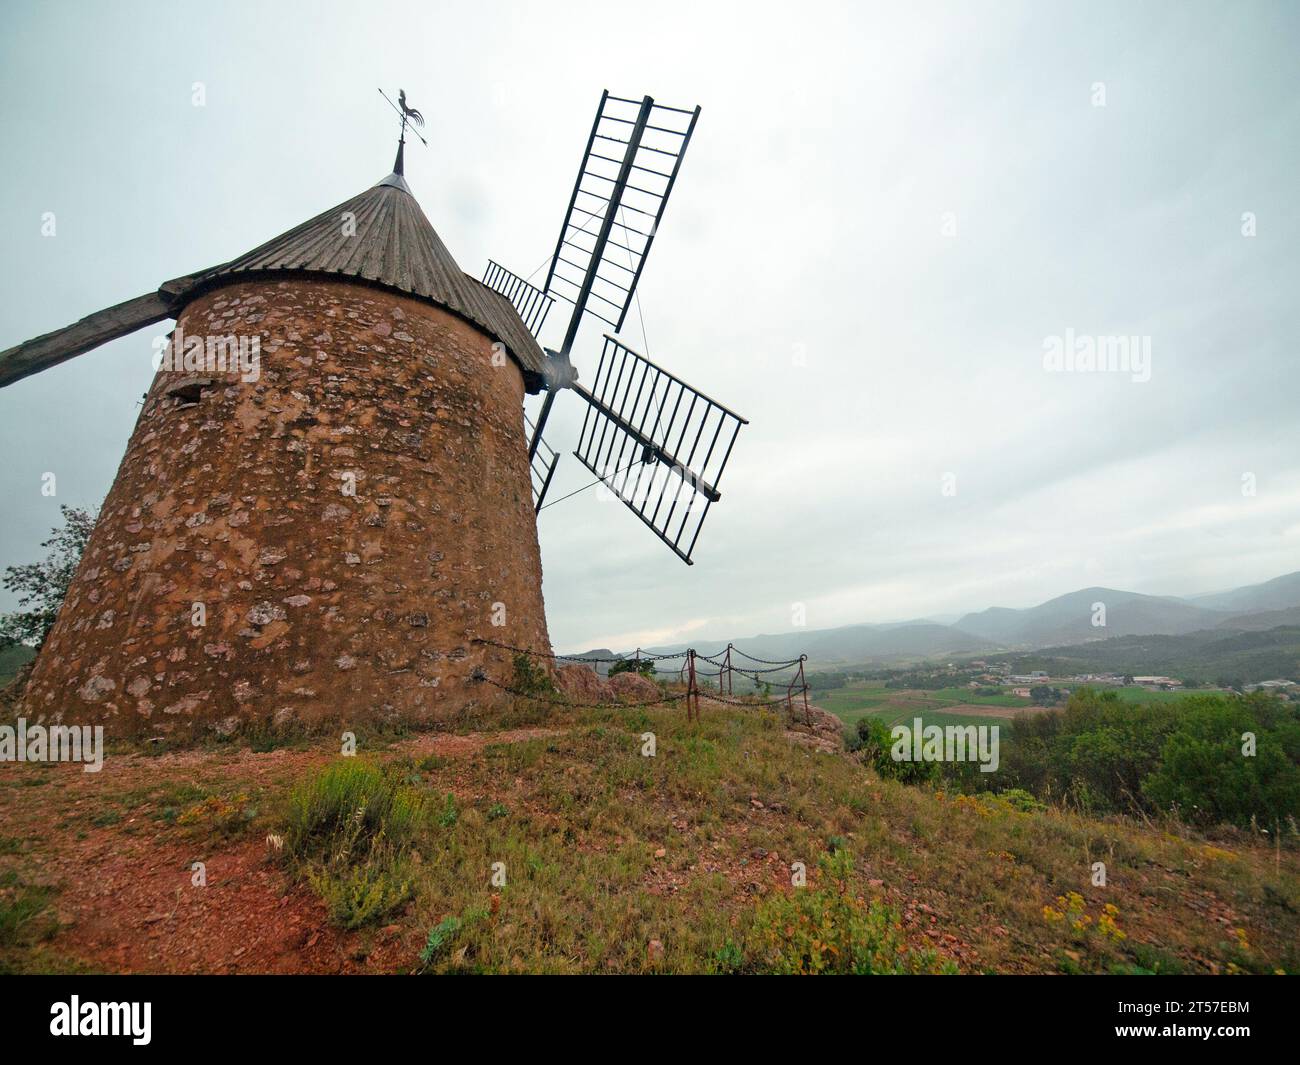 A windmill on the outskirts of Saint-Chinian, France Stock Photo